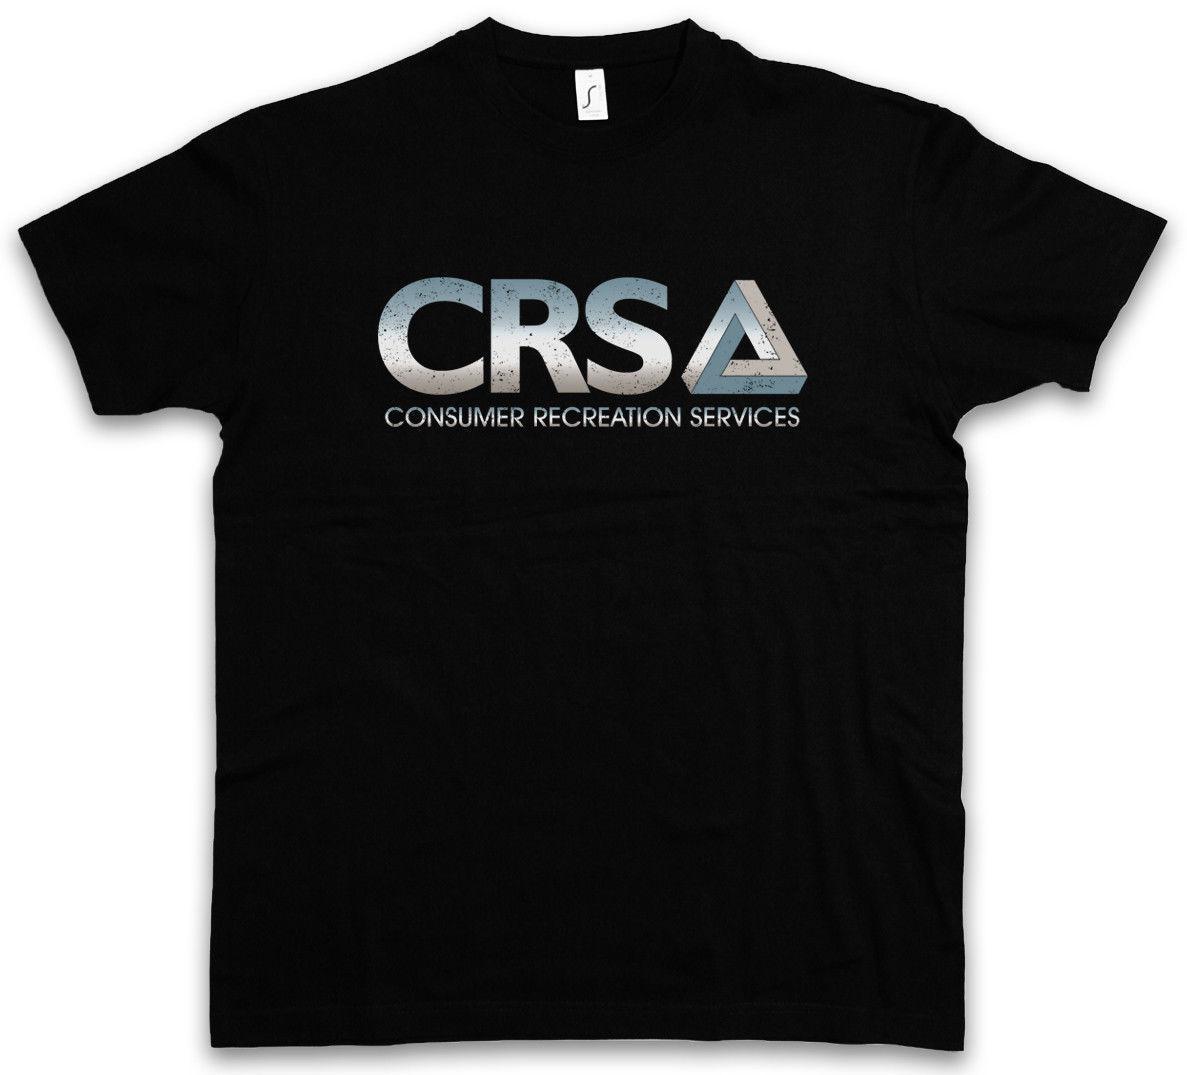 Cool Game Company Logo - CRS LOGO T SHIRT Consumer Recreation The Services Game Company Logo